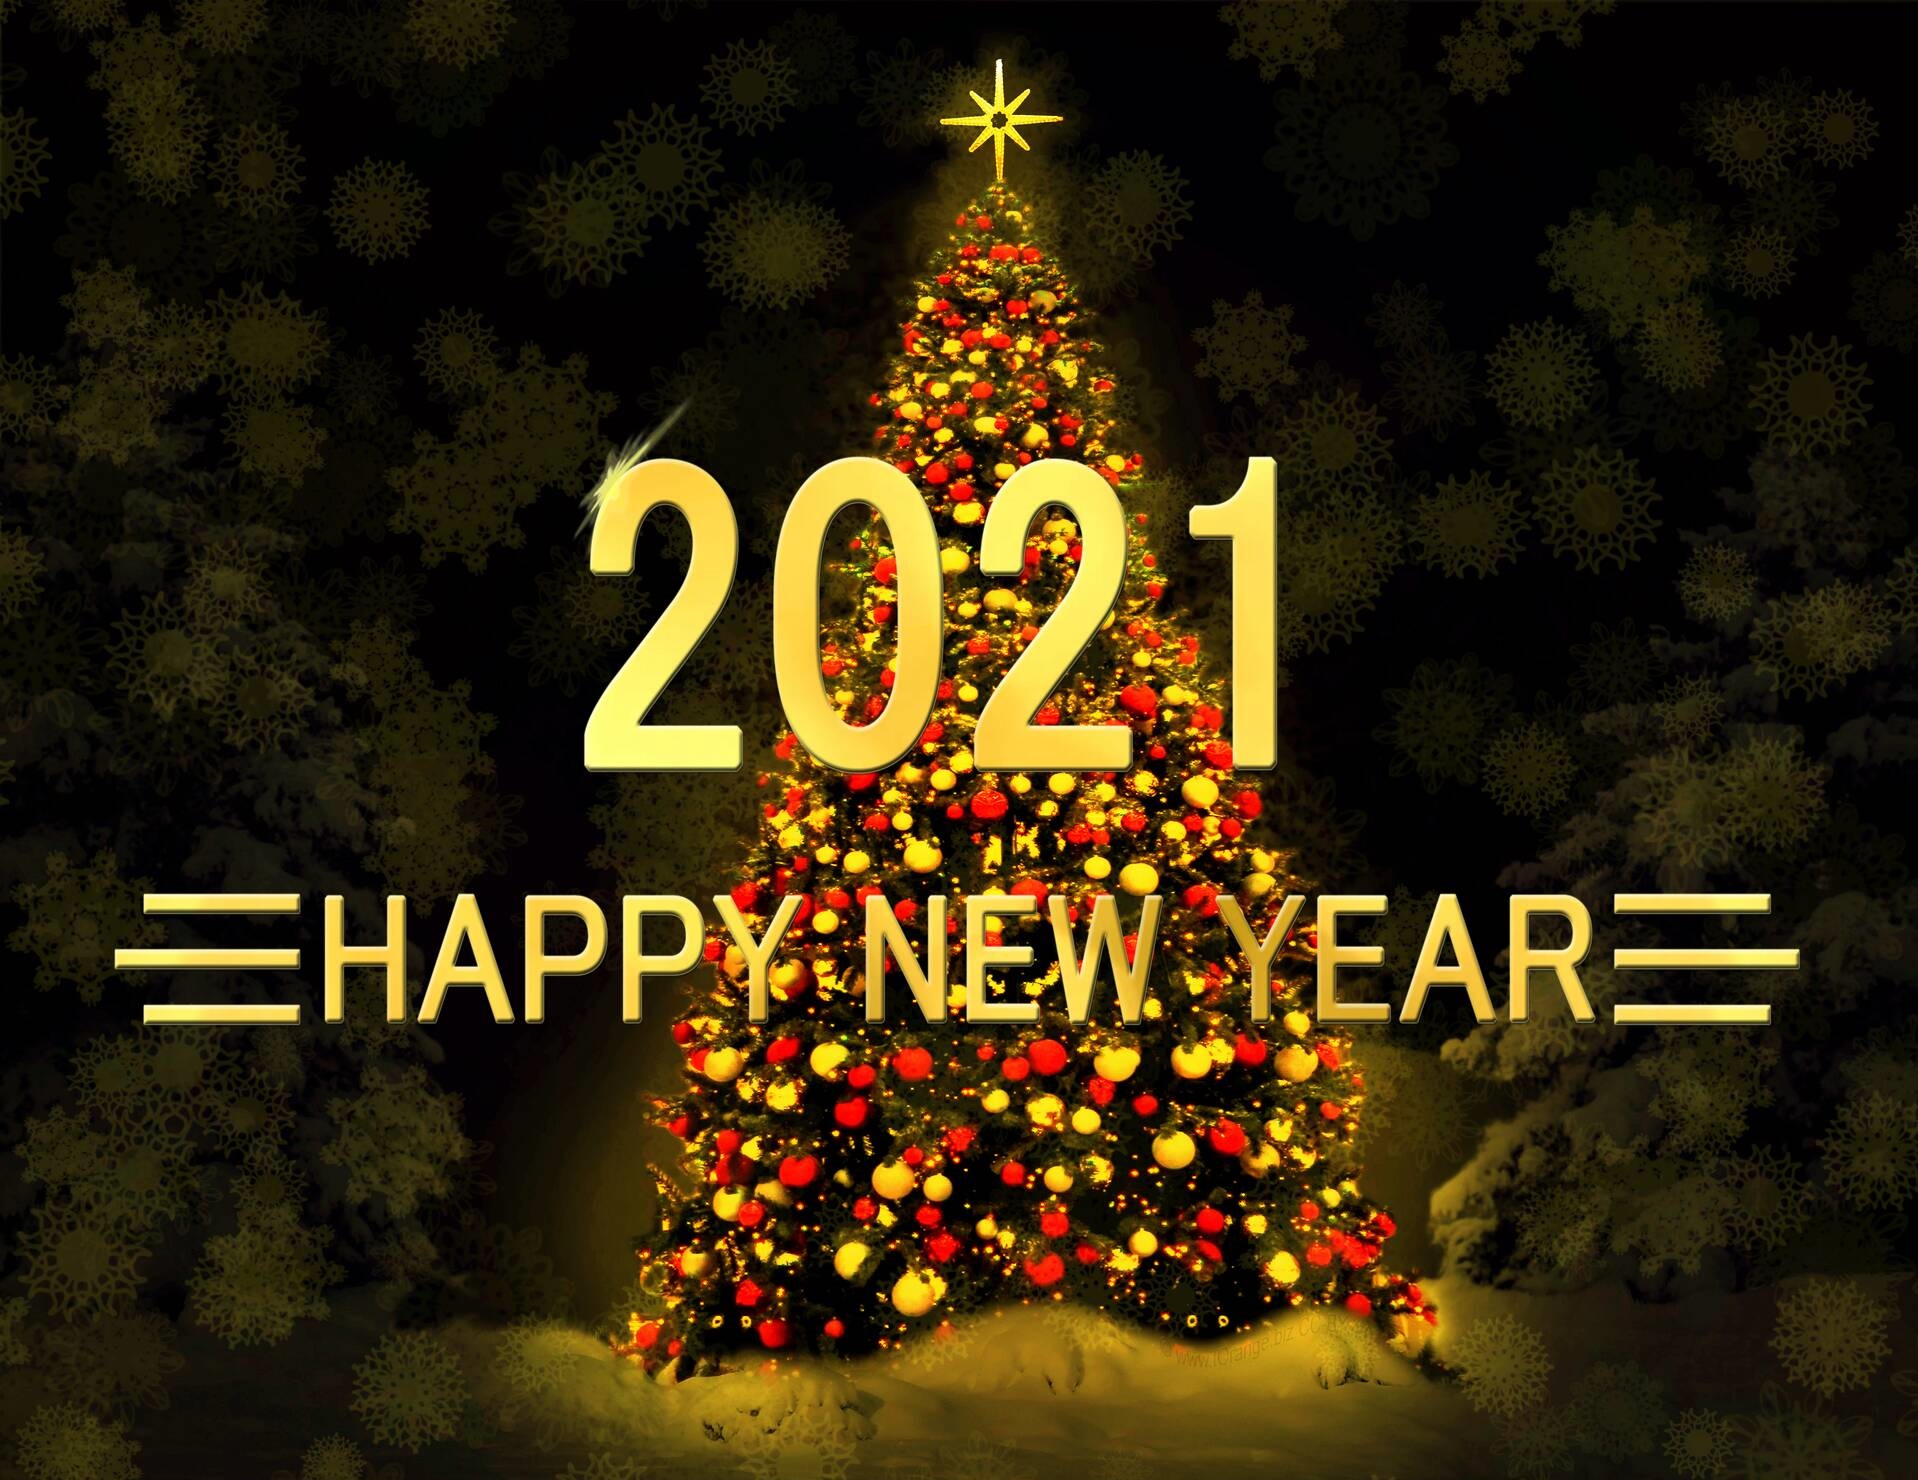 Happy New Year 4k Images, HD Wallpapers, Photos 2021 [Free Download]